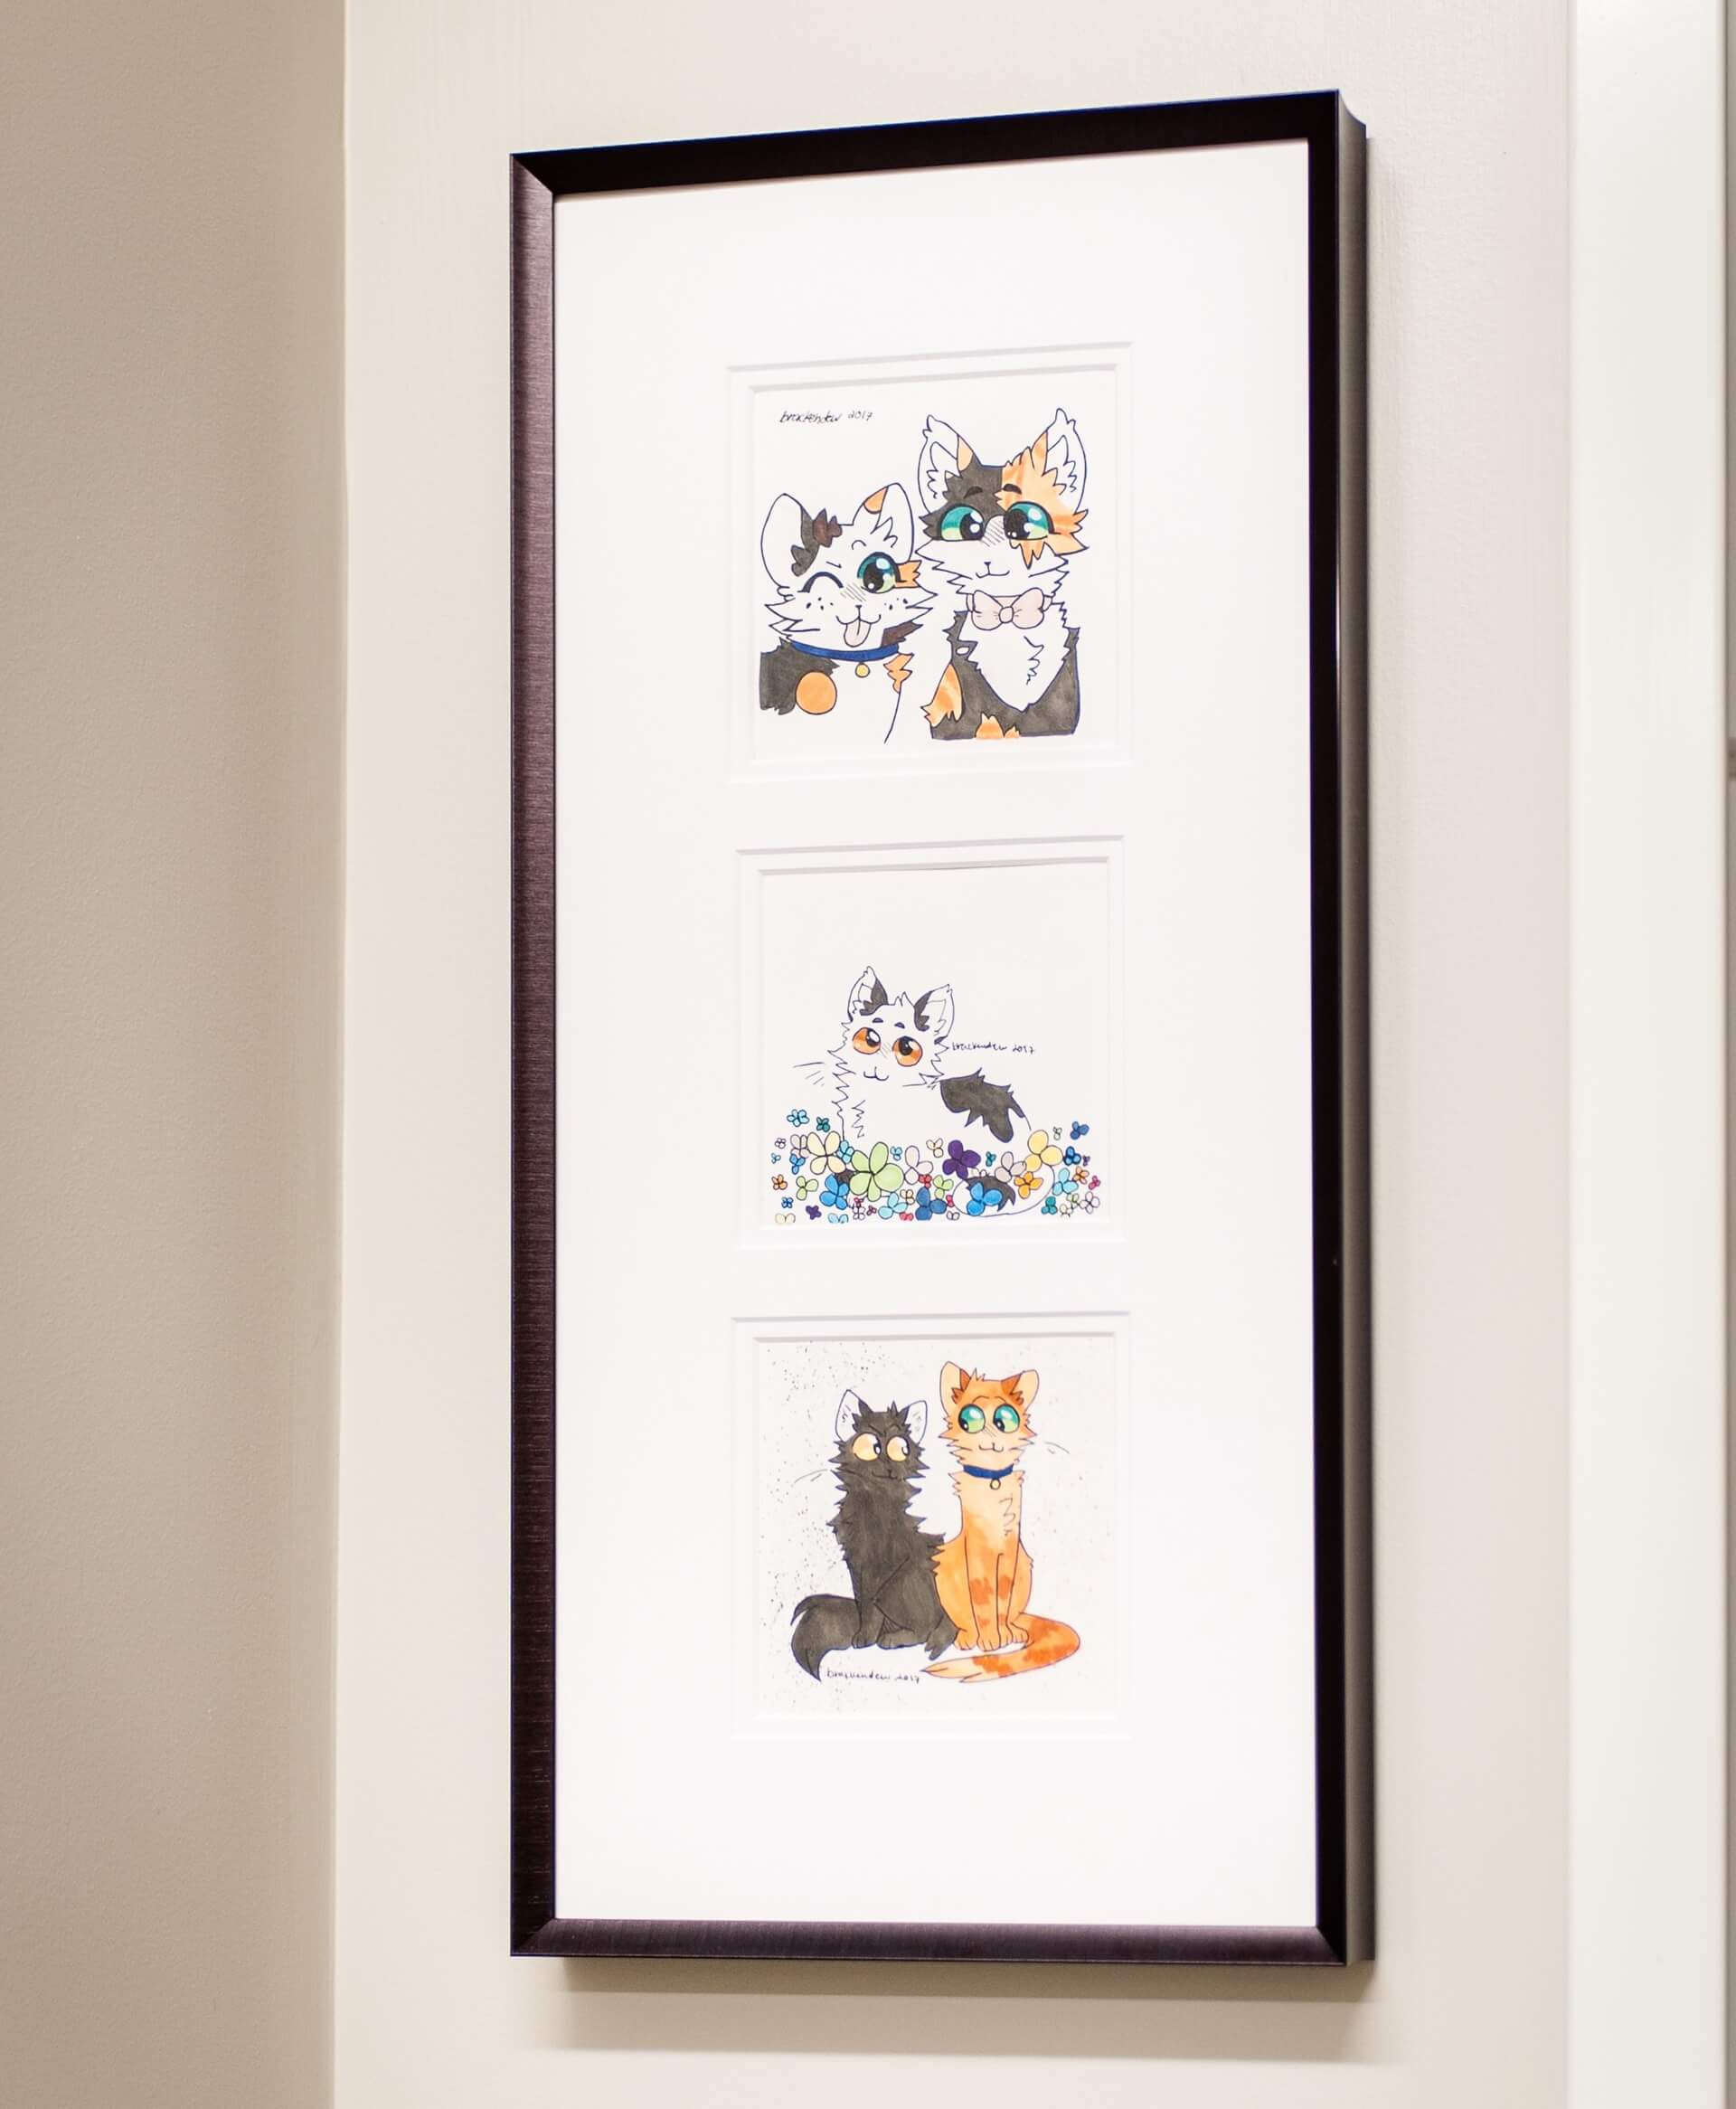 A framed picture of cats